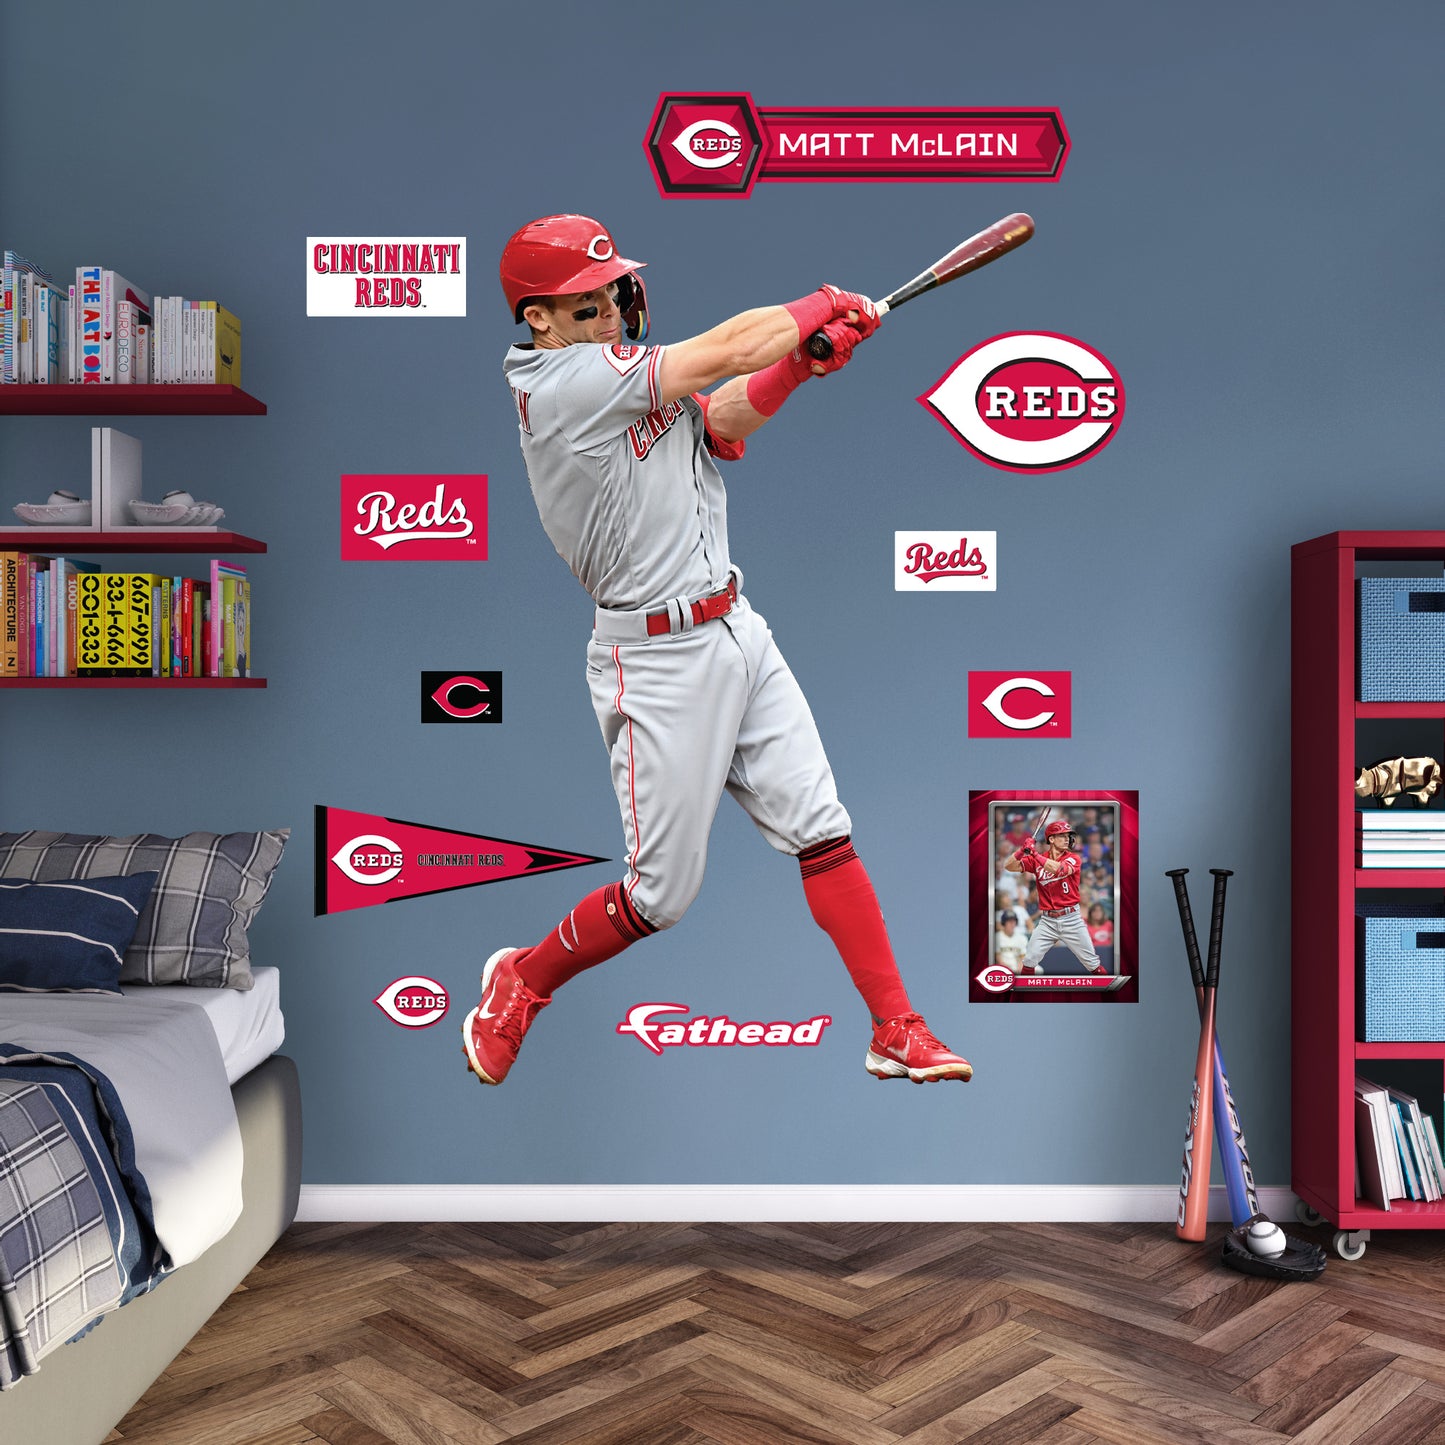 Cincinnati Reds: Matt McLain         - Officially Licensed MLB Removable     Adhesive Decal